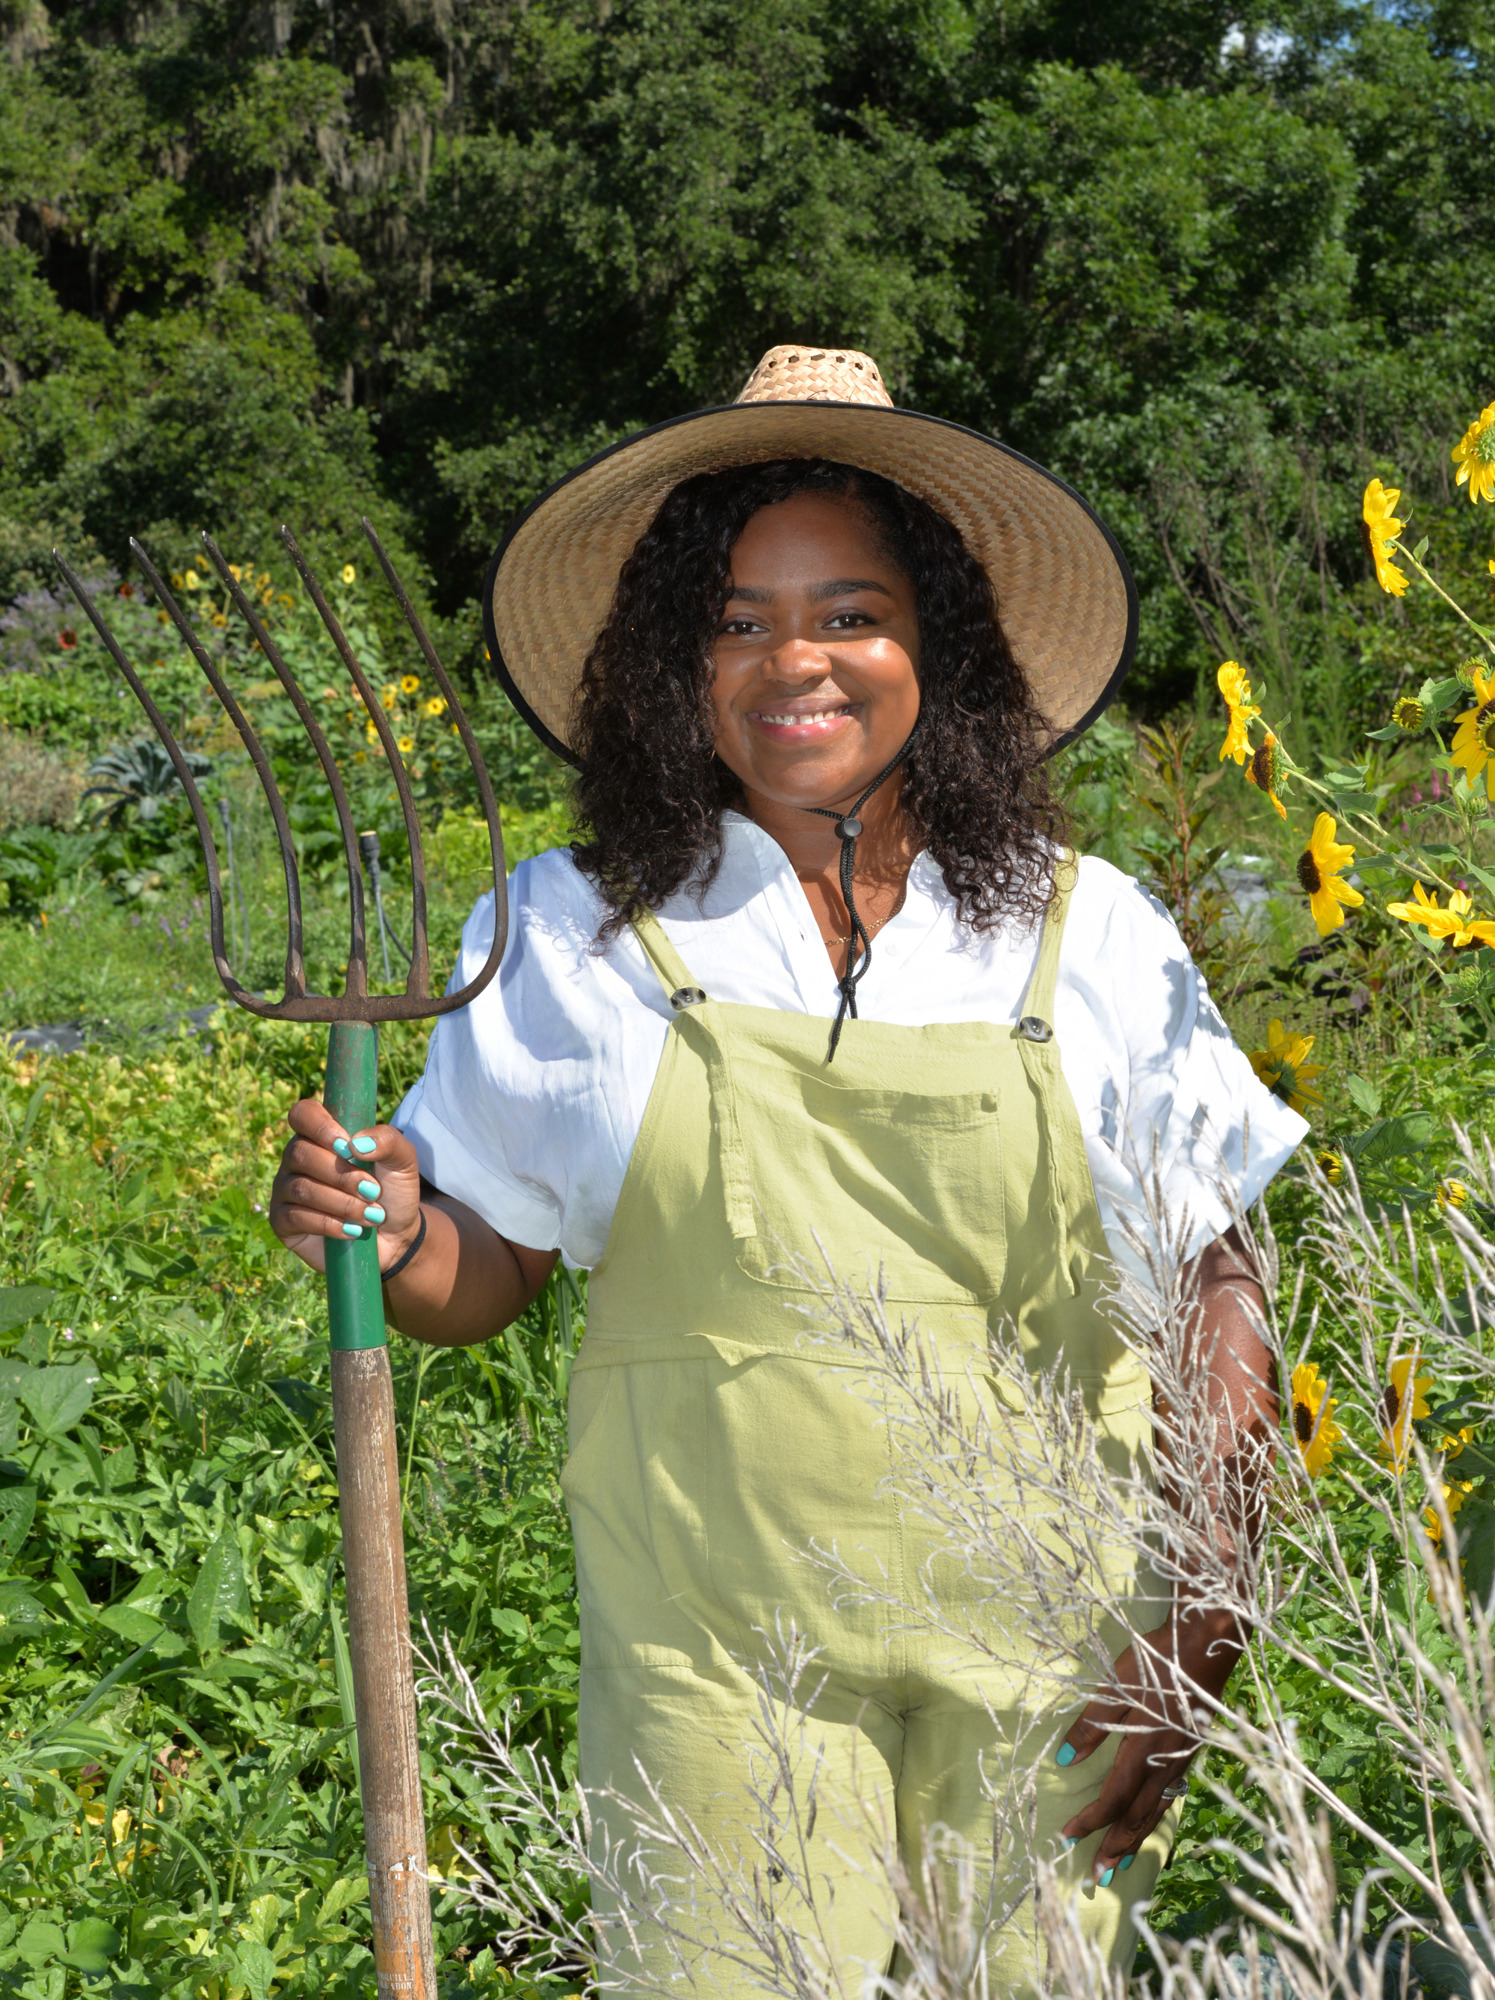 Photo by Dede Smith: Ashantae Green, the owner of Green Legacy Farm.